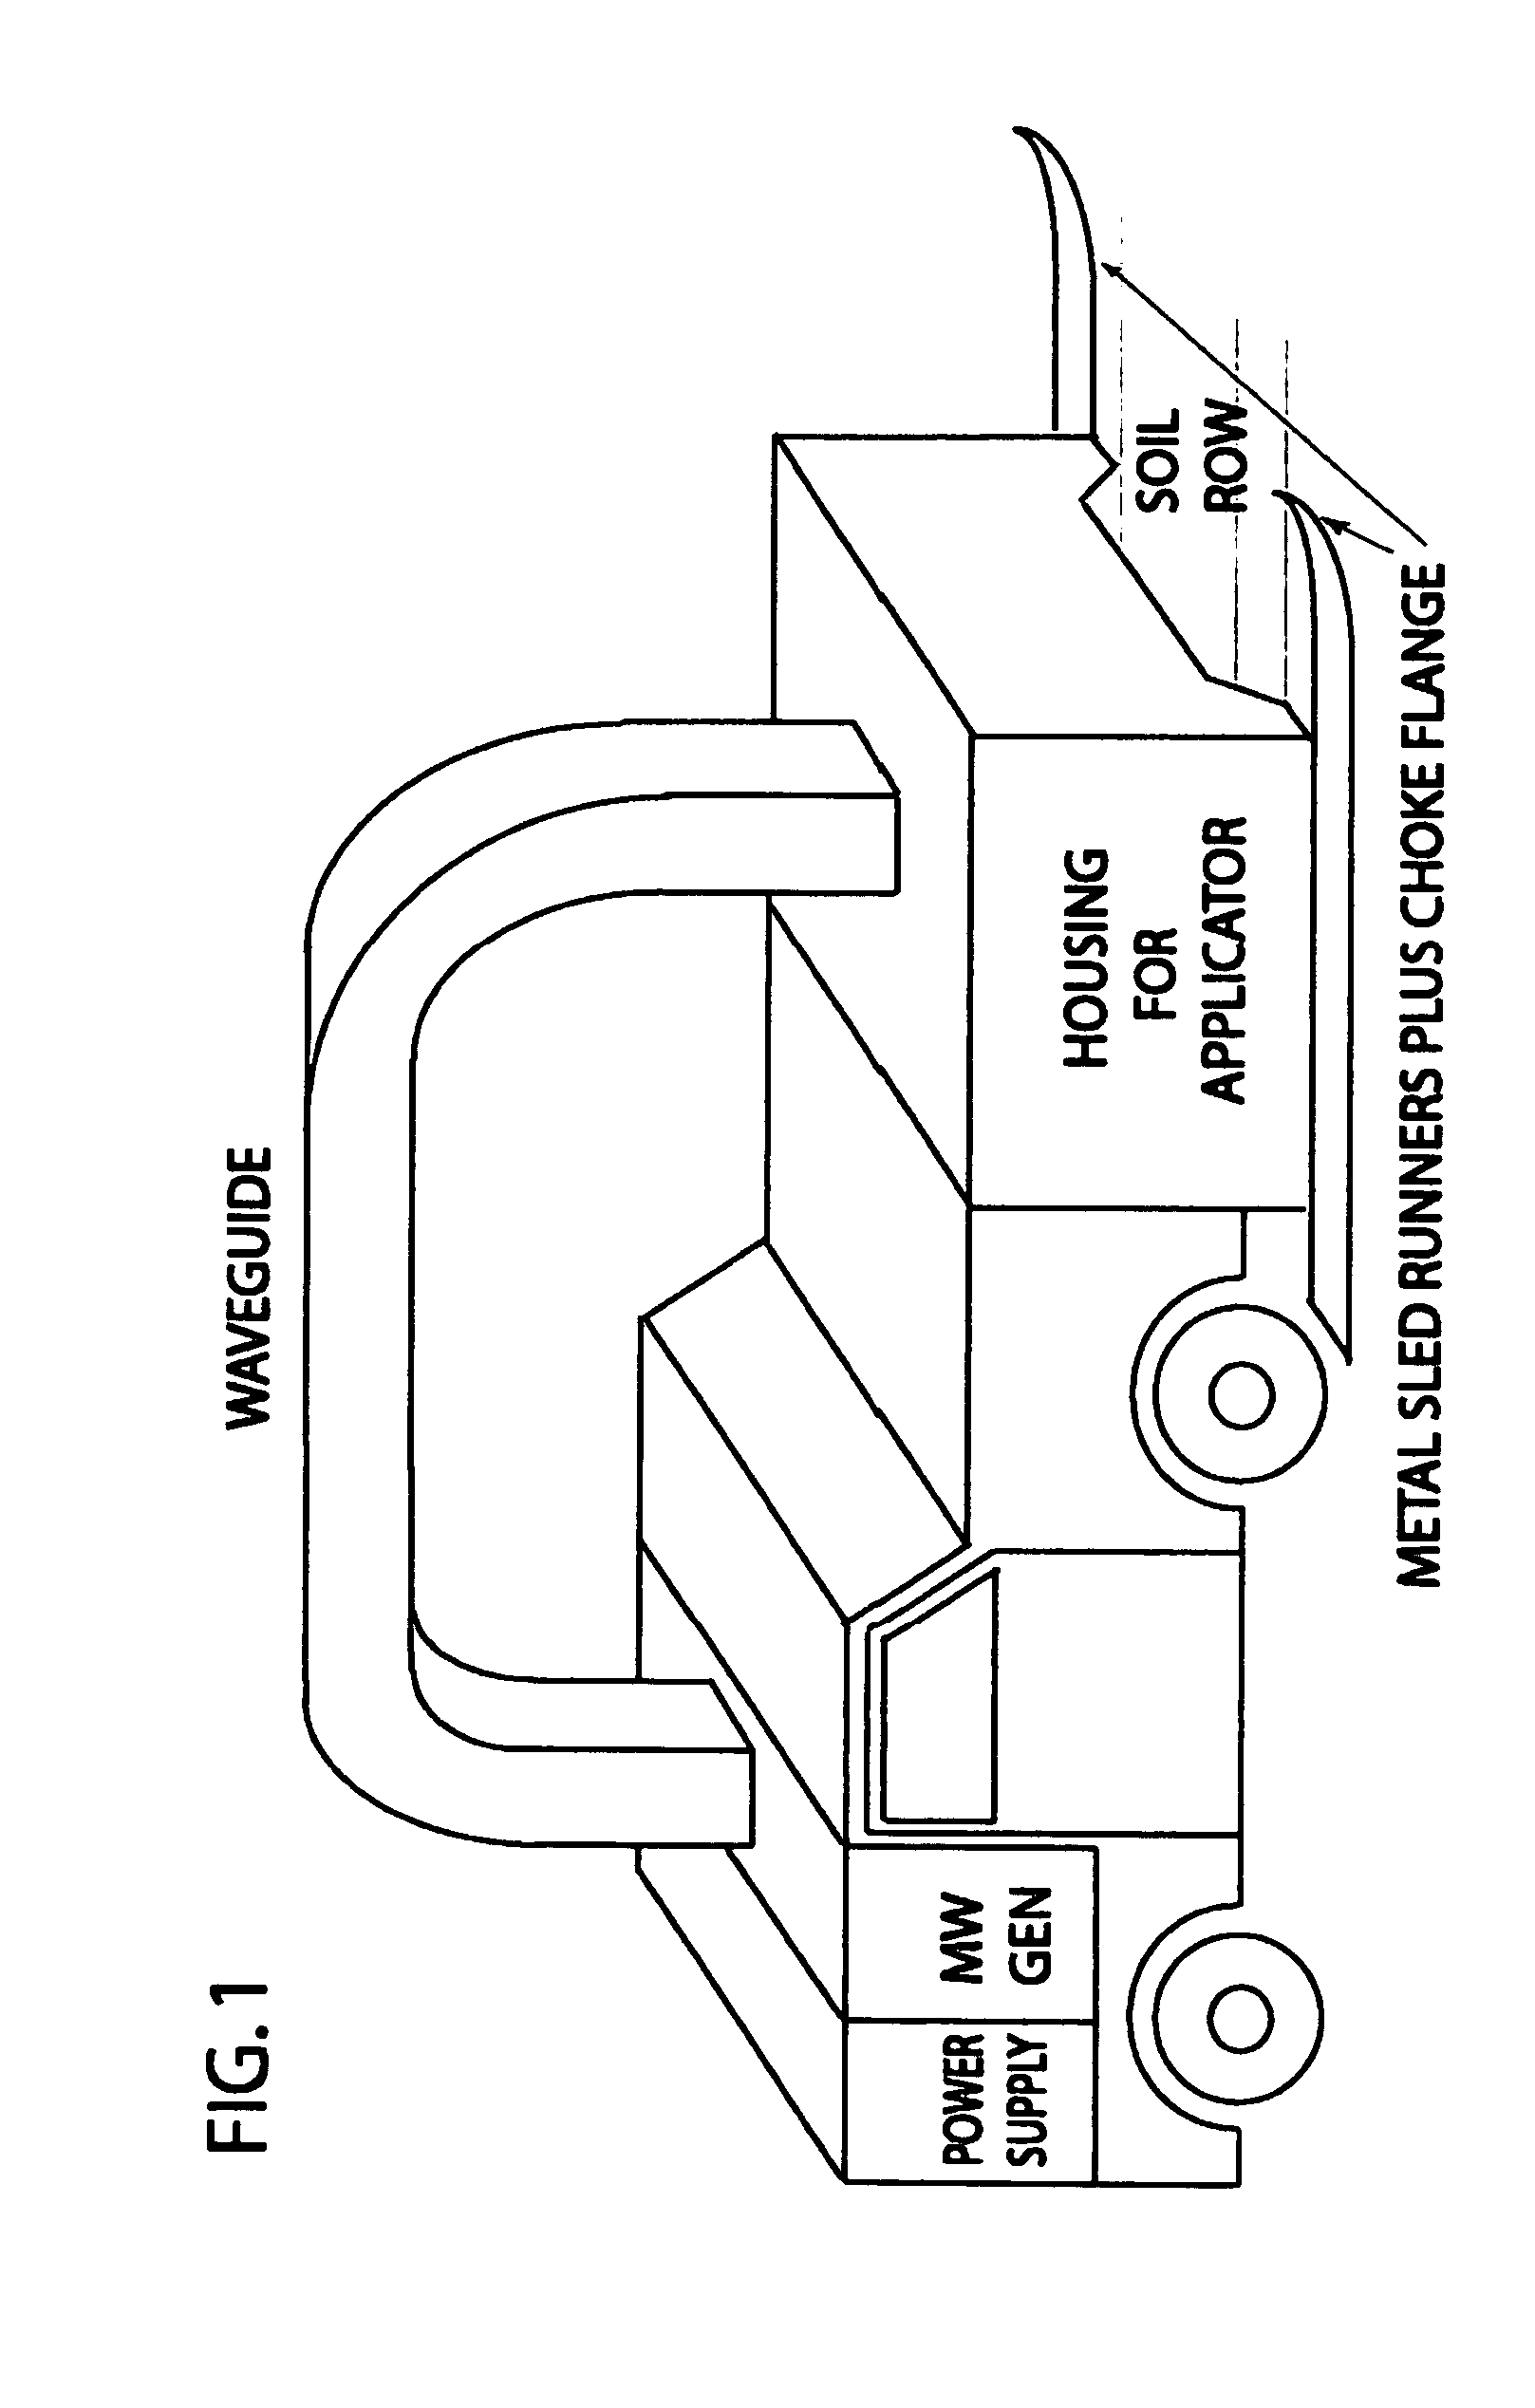 Microwave system and method for controling the sterlization and infestation of crop soils